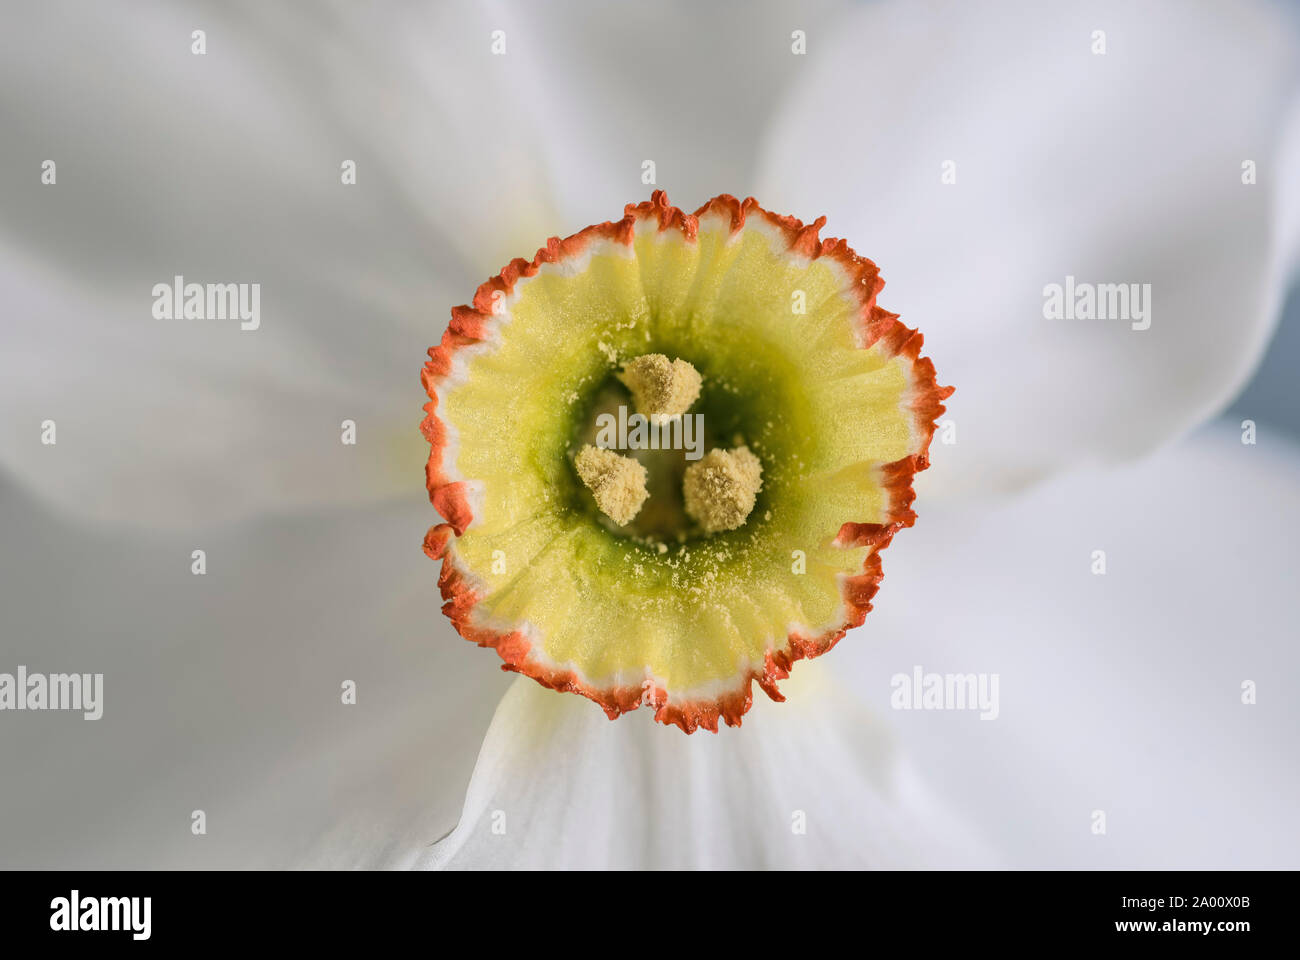 poet's daffodil, Europe, (Narcissus poeticus) Stock Photo